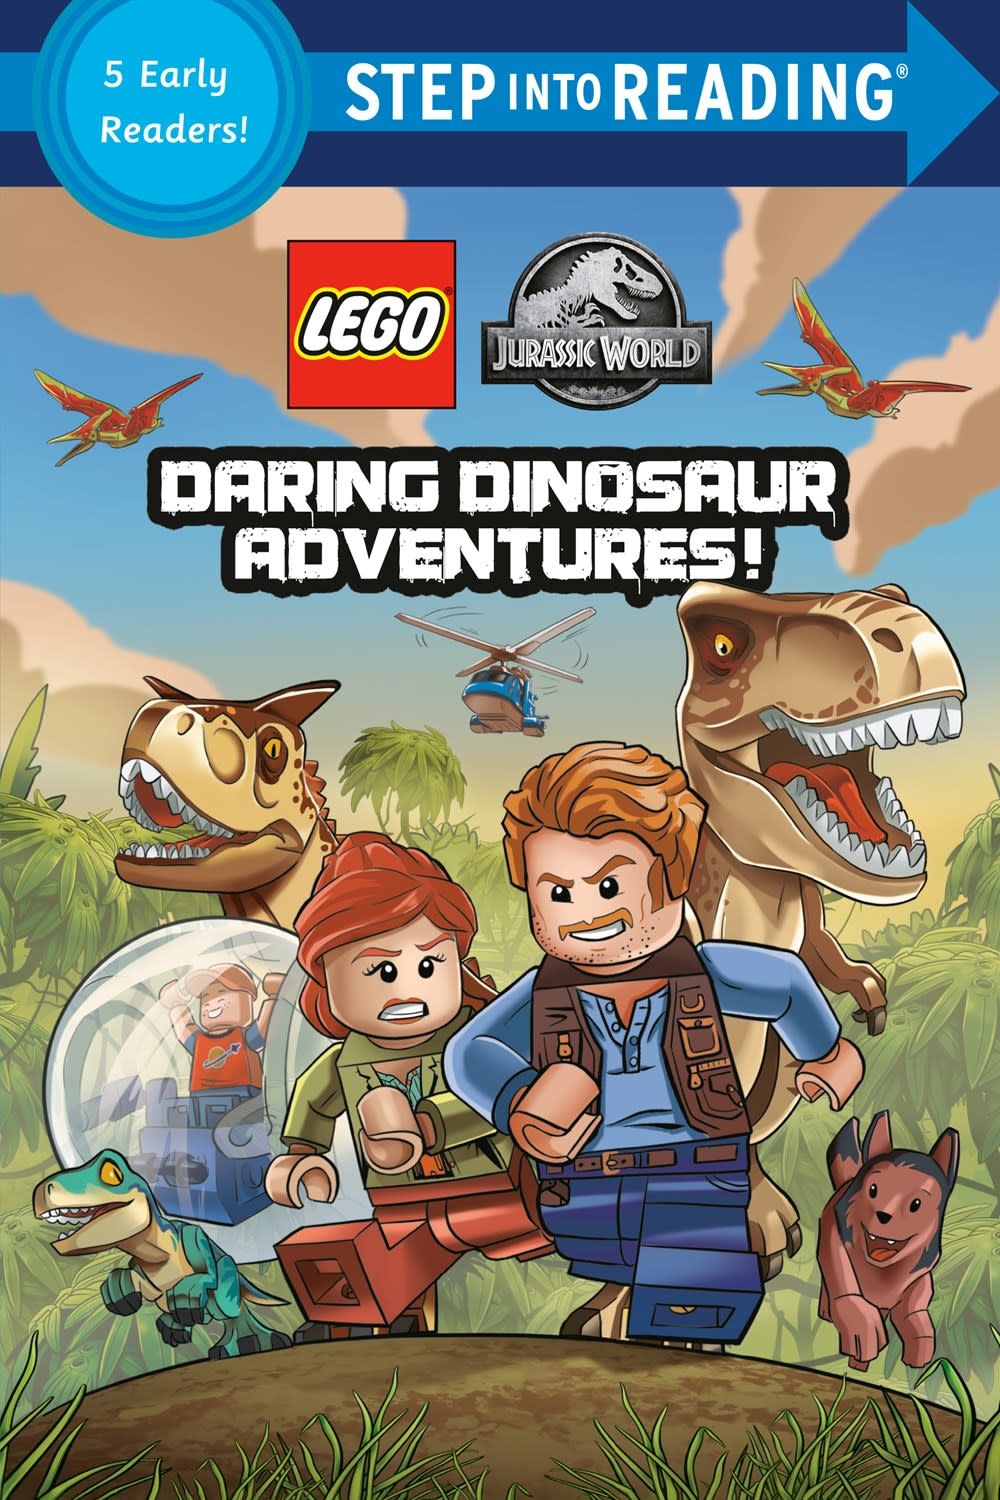 Random House Books for Young Readers LEGO Jurassic World: Daring Dinosaur Adventures! (Step-Into-Reading, 5-in-1 Book)